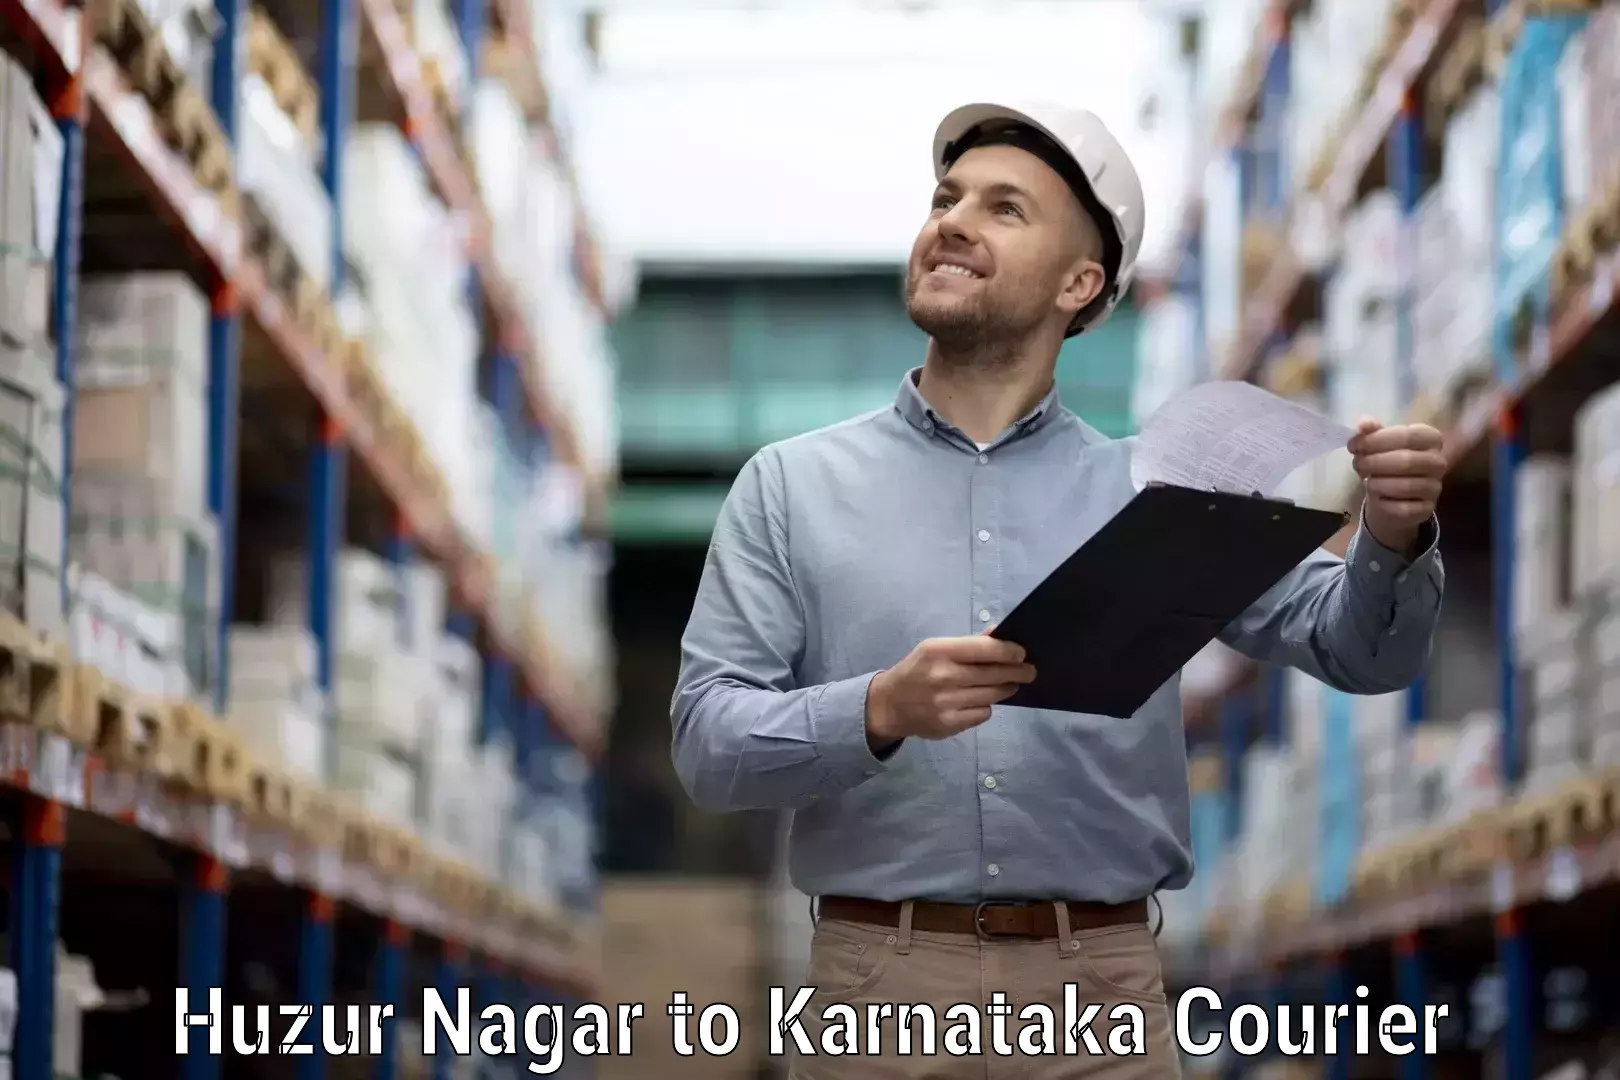 State-of-the-art courier technology Huzur Nagar to Chikmagalur